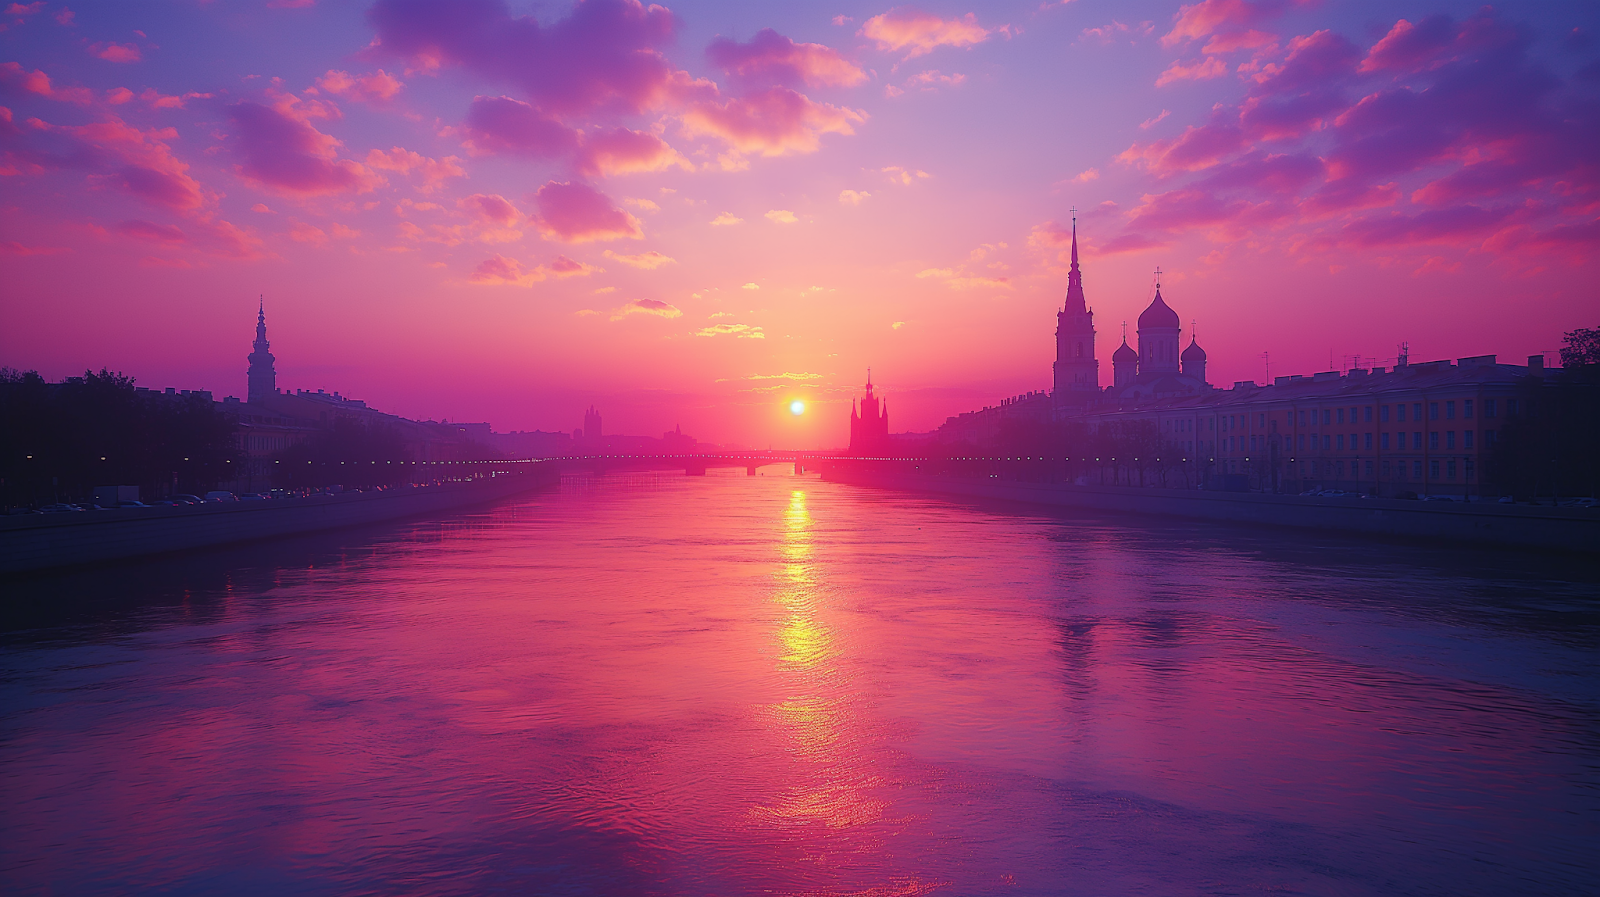 Twilight view over the Neva River featuring the silhouette of the Peter and Paul Fortress under a dusky sky.